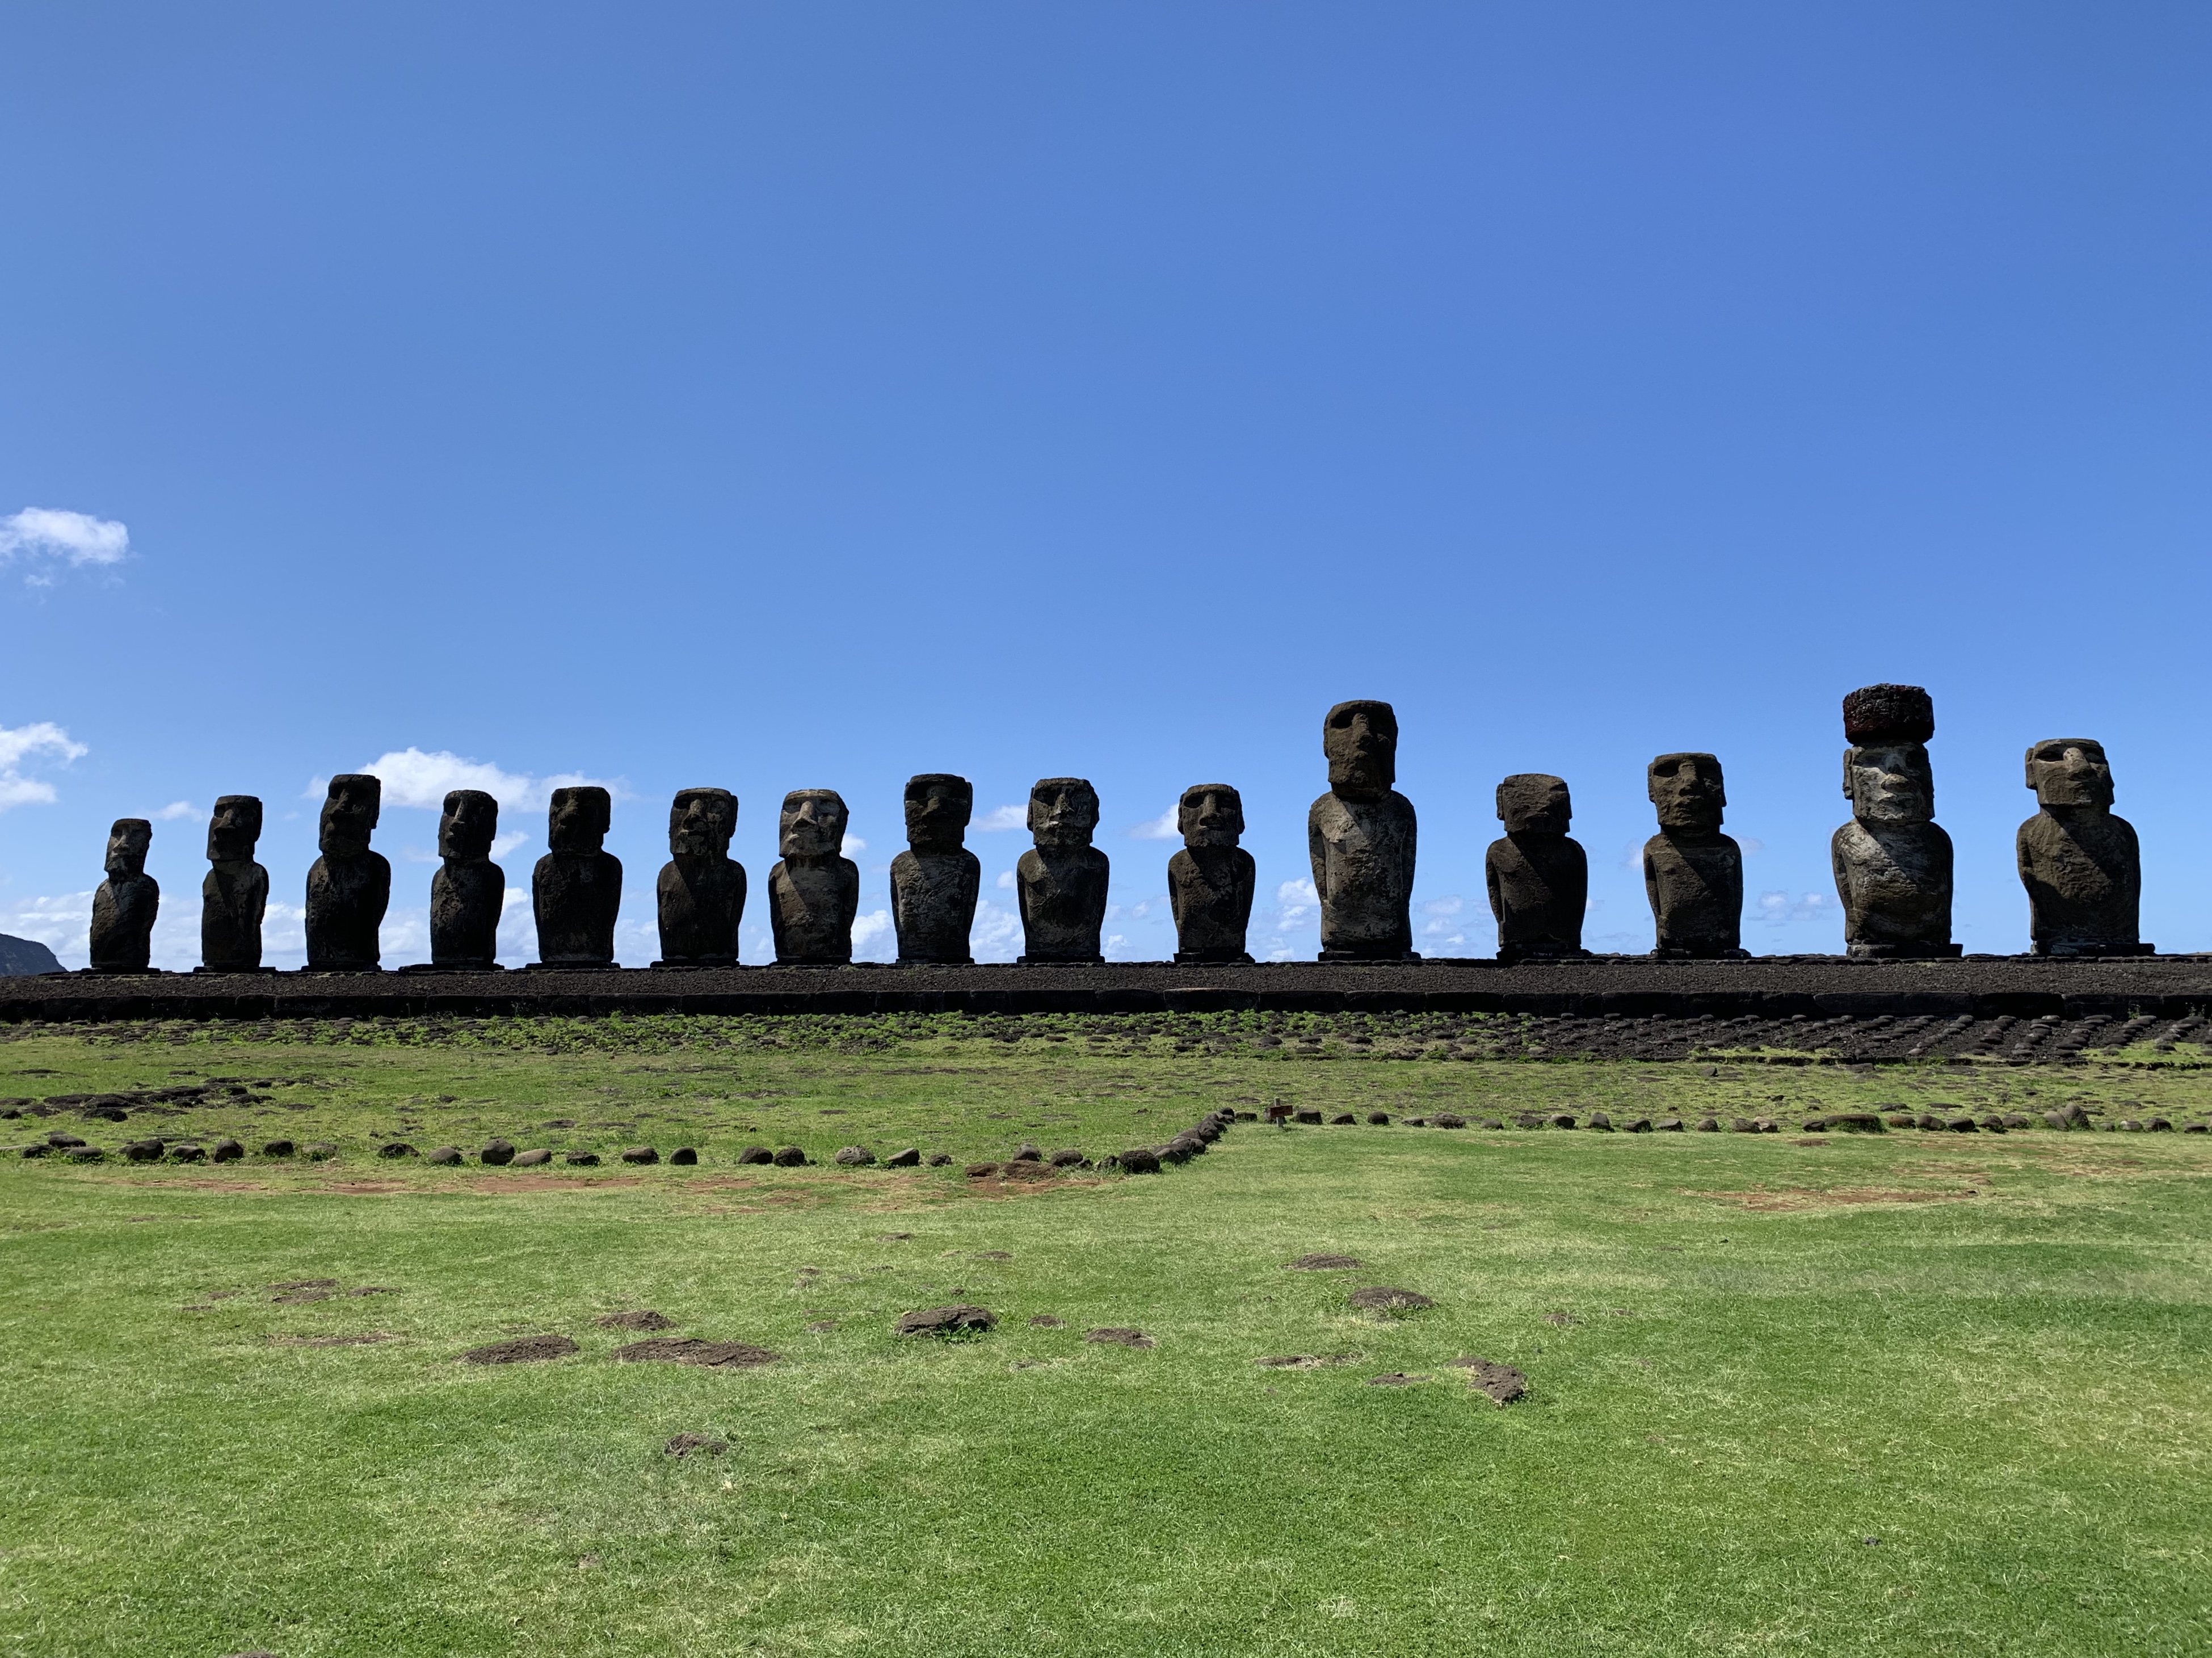 VIDEO: The Moais of Easter Island